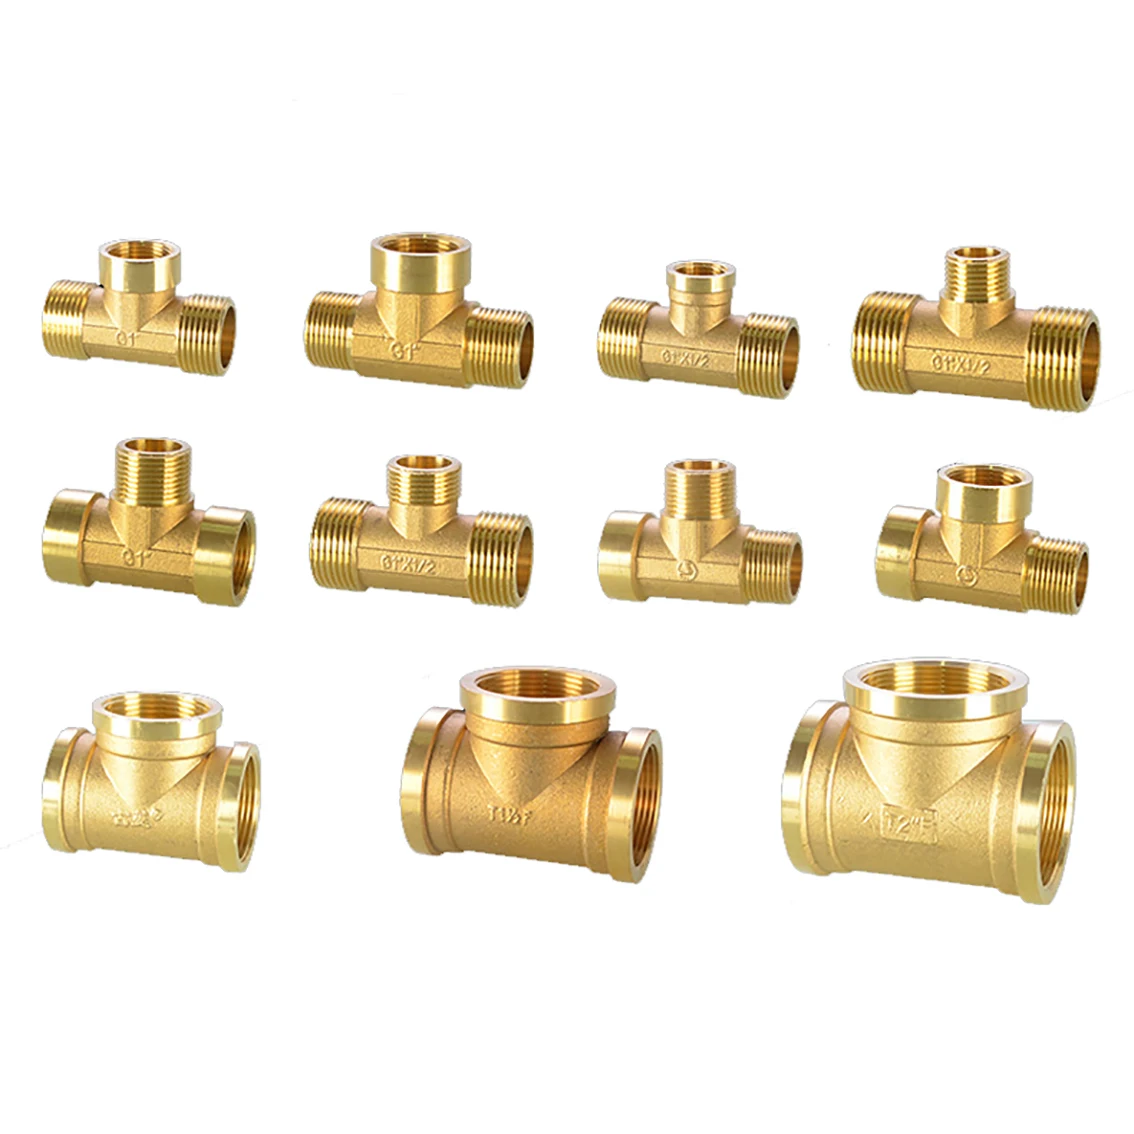 

3-Way Brass Reducer Pipe Fittings Connector 1/2" 3/4" 1" 1.2" 1.5" 2" T-Type Water Gas Oil Hose Converters Socket Adapter Tools